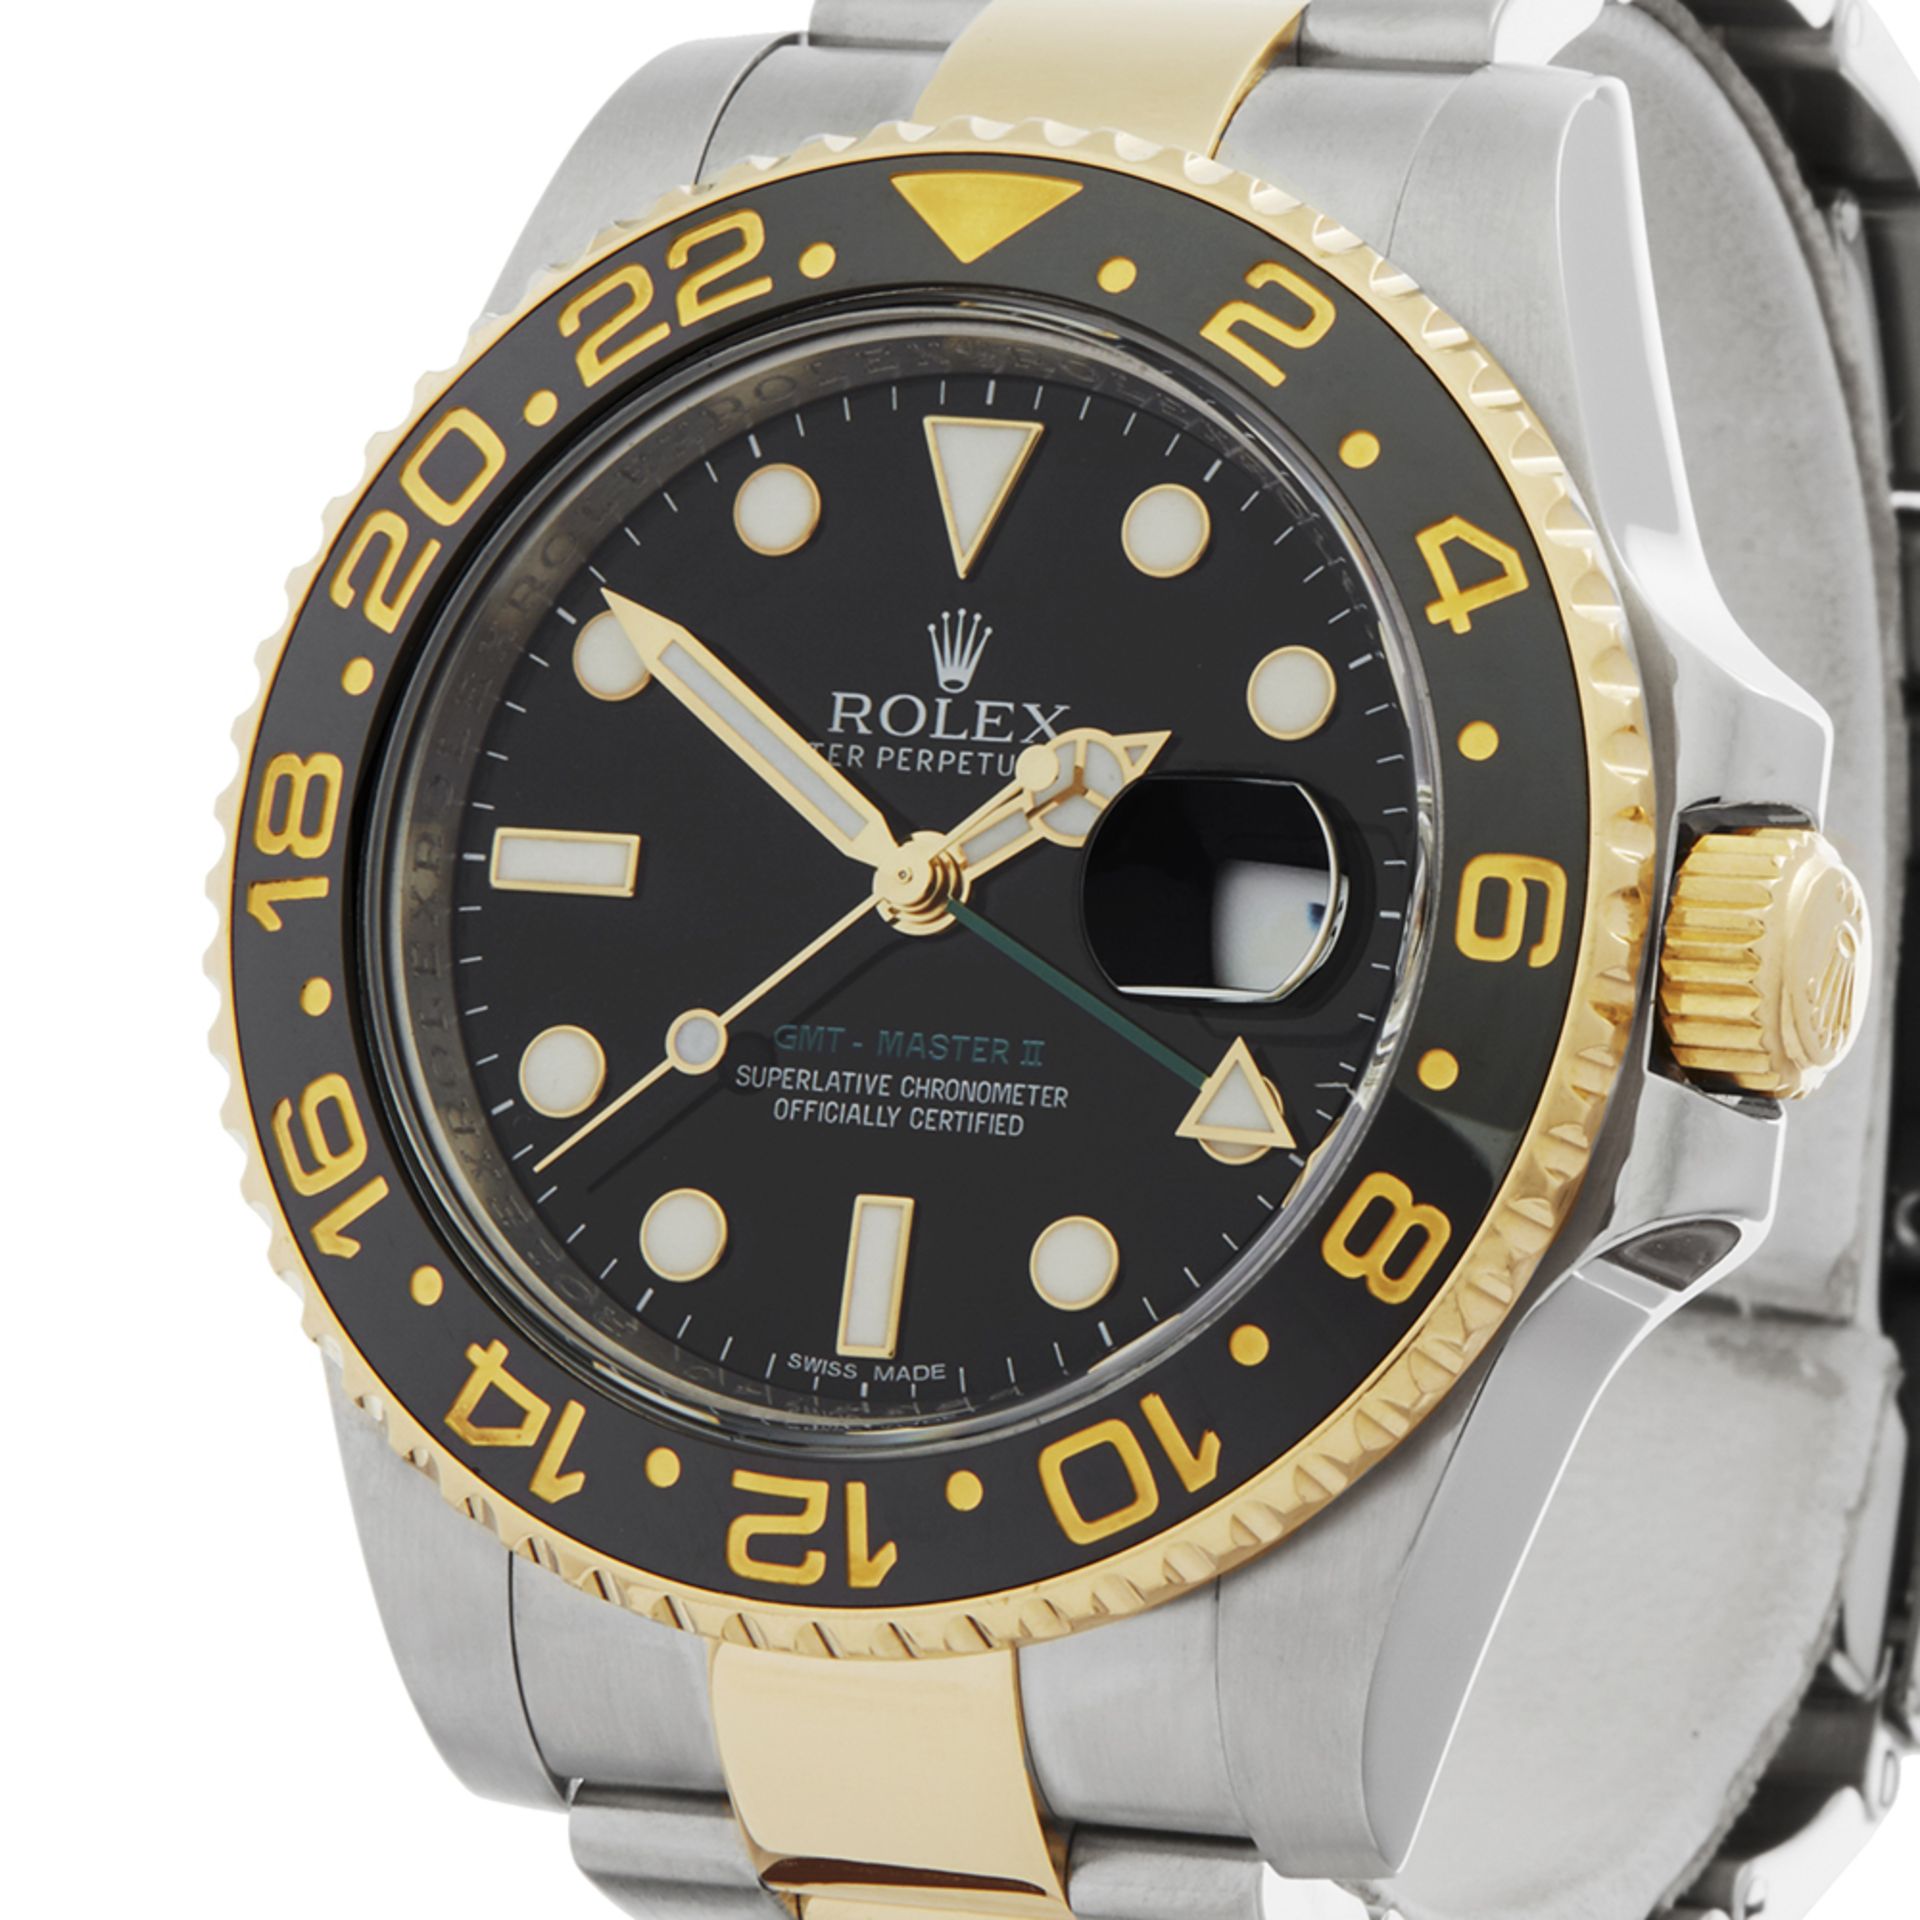 Rolex GMT-Master II Stainless Steel & 18K Yellow Gold - 116713